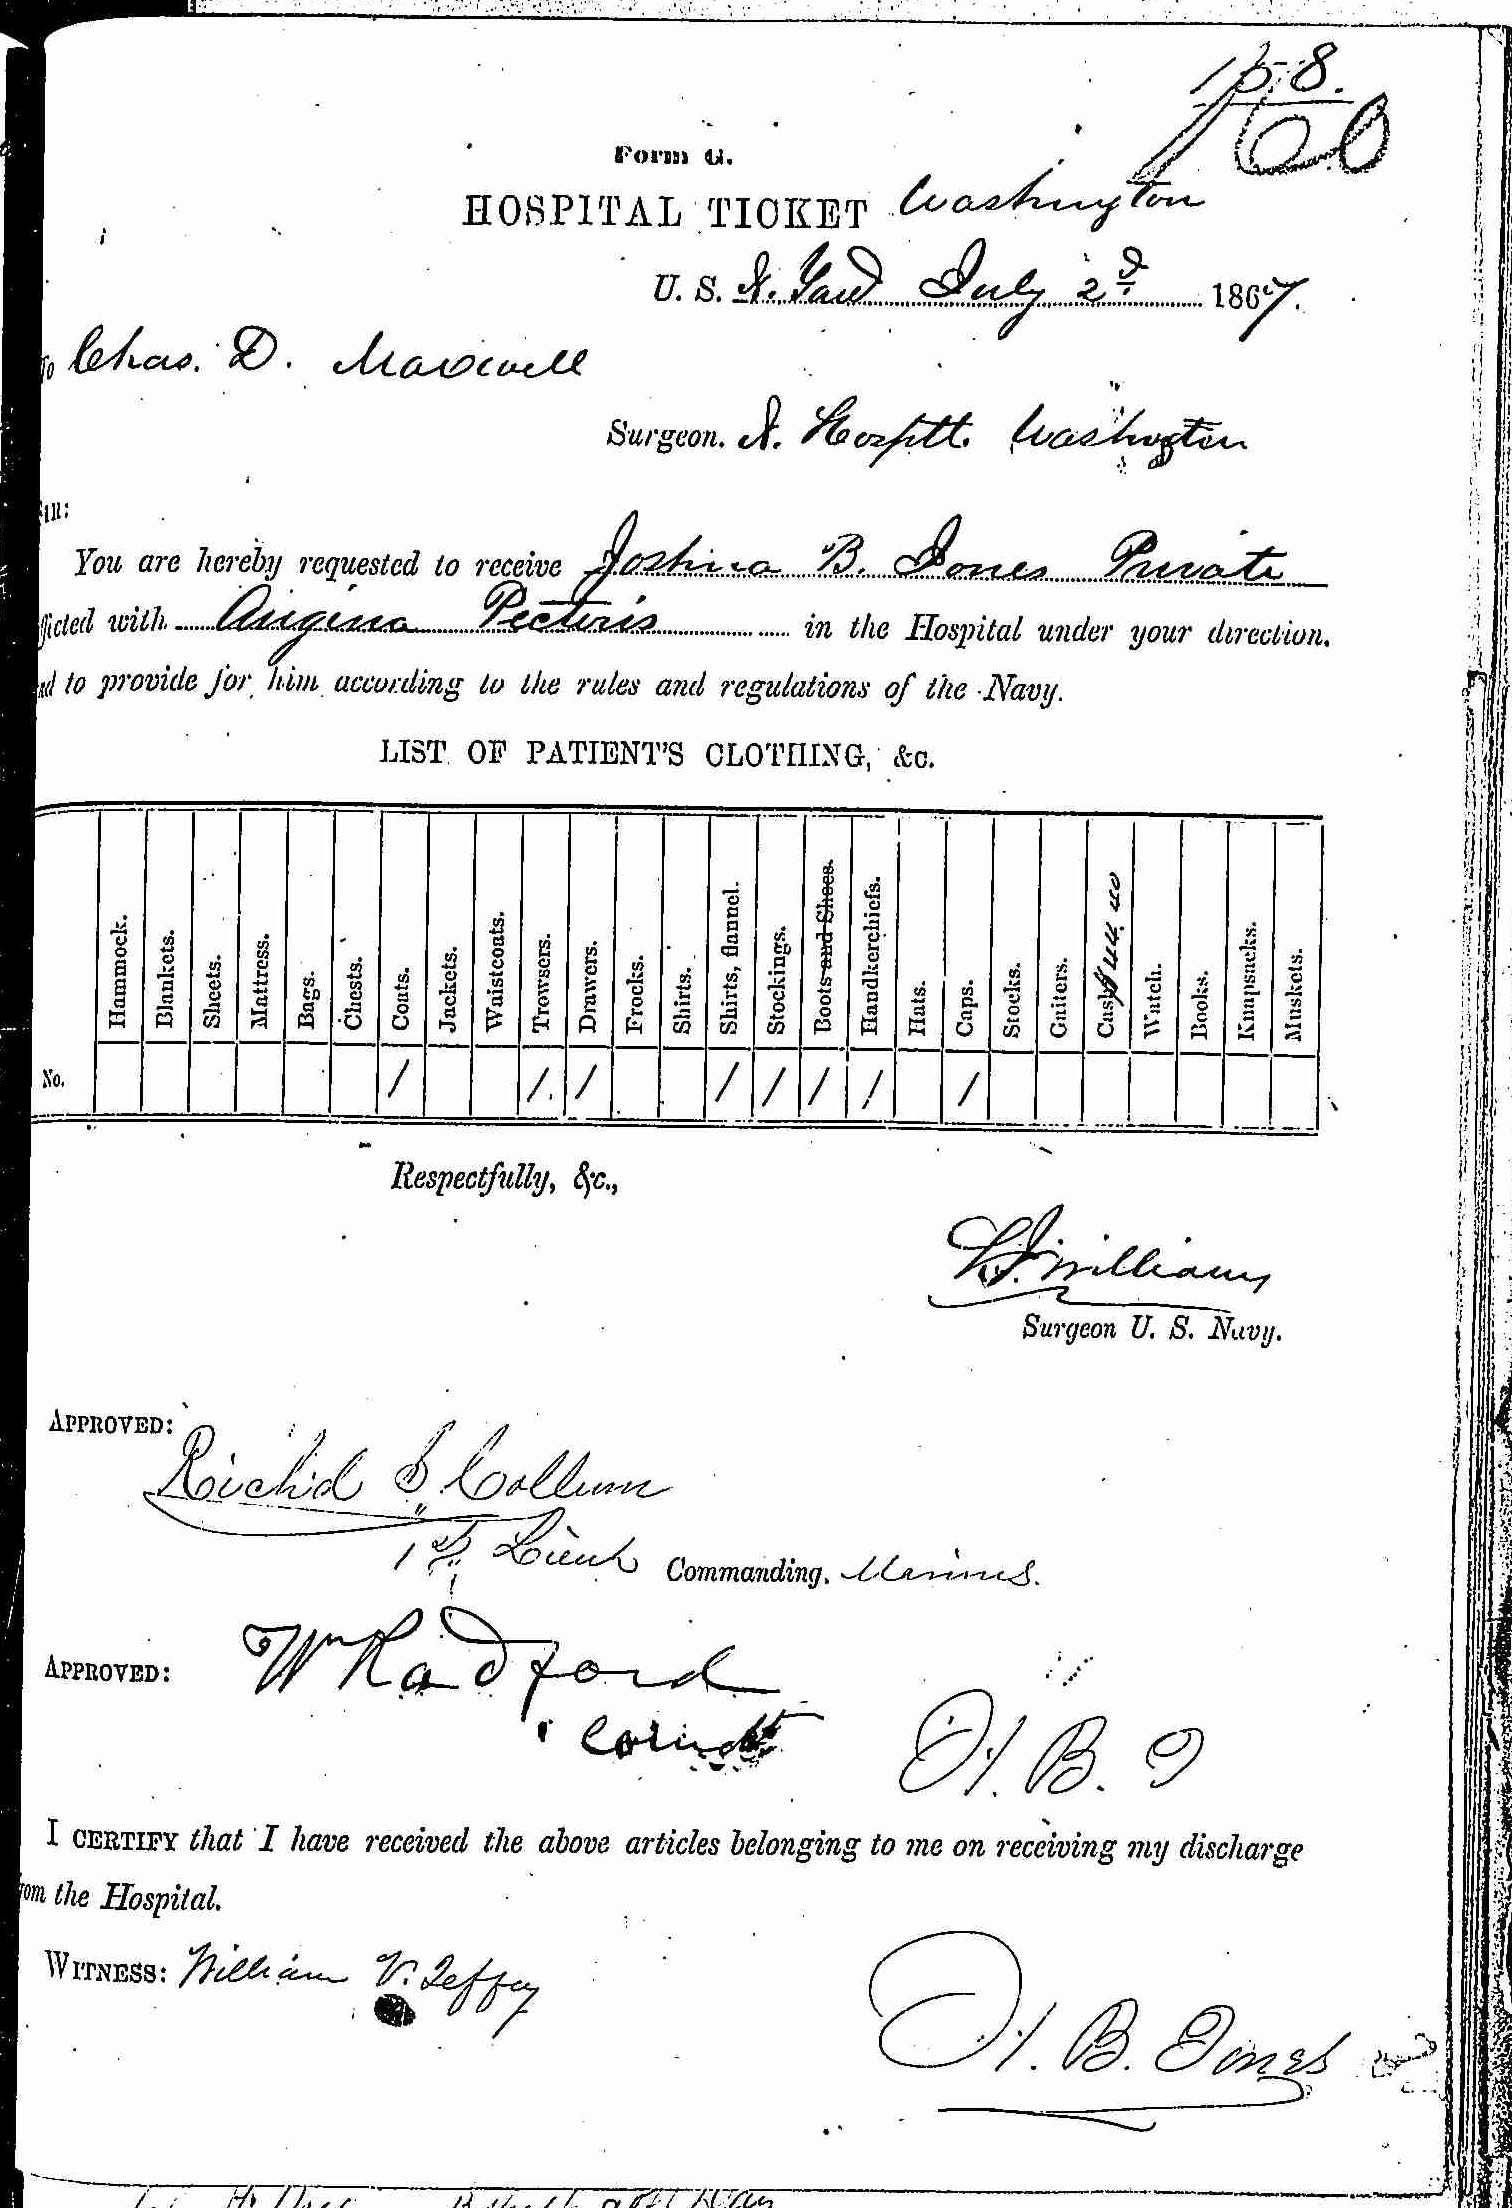 Entry for Joshua B. Jones (page 3 of 4) in the log Hospital Tickets and Case Papers - Naval Hospital - Washington, D.C. - 1866-68